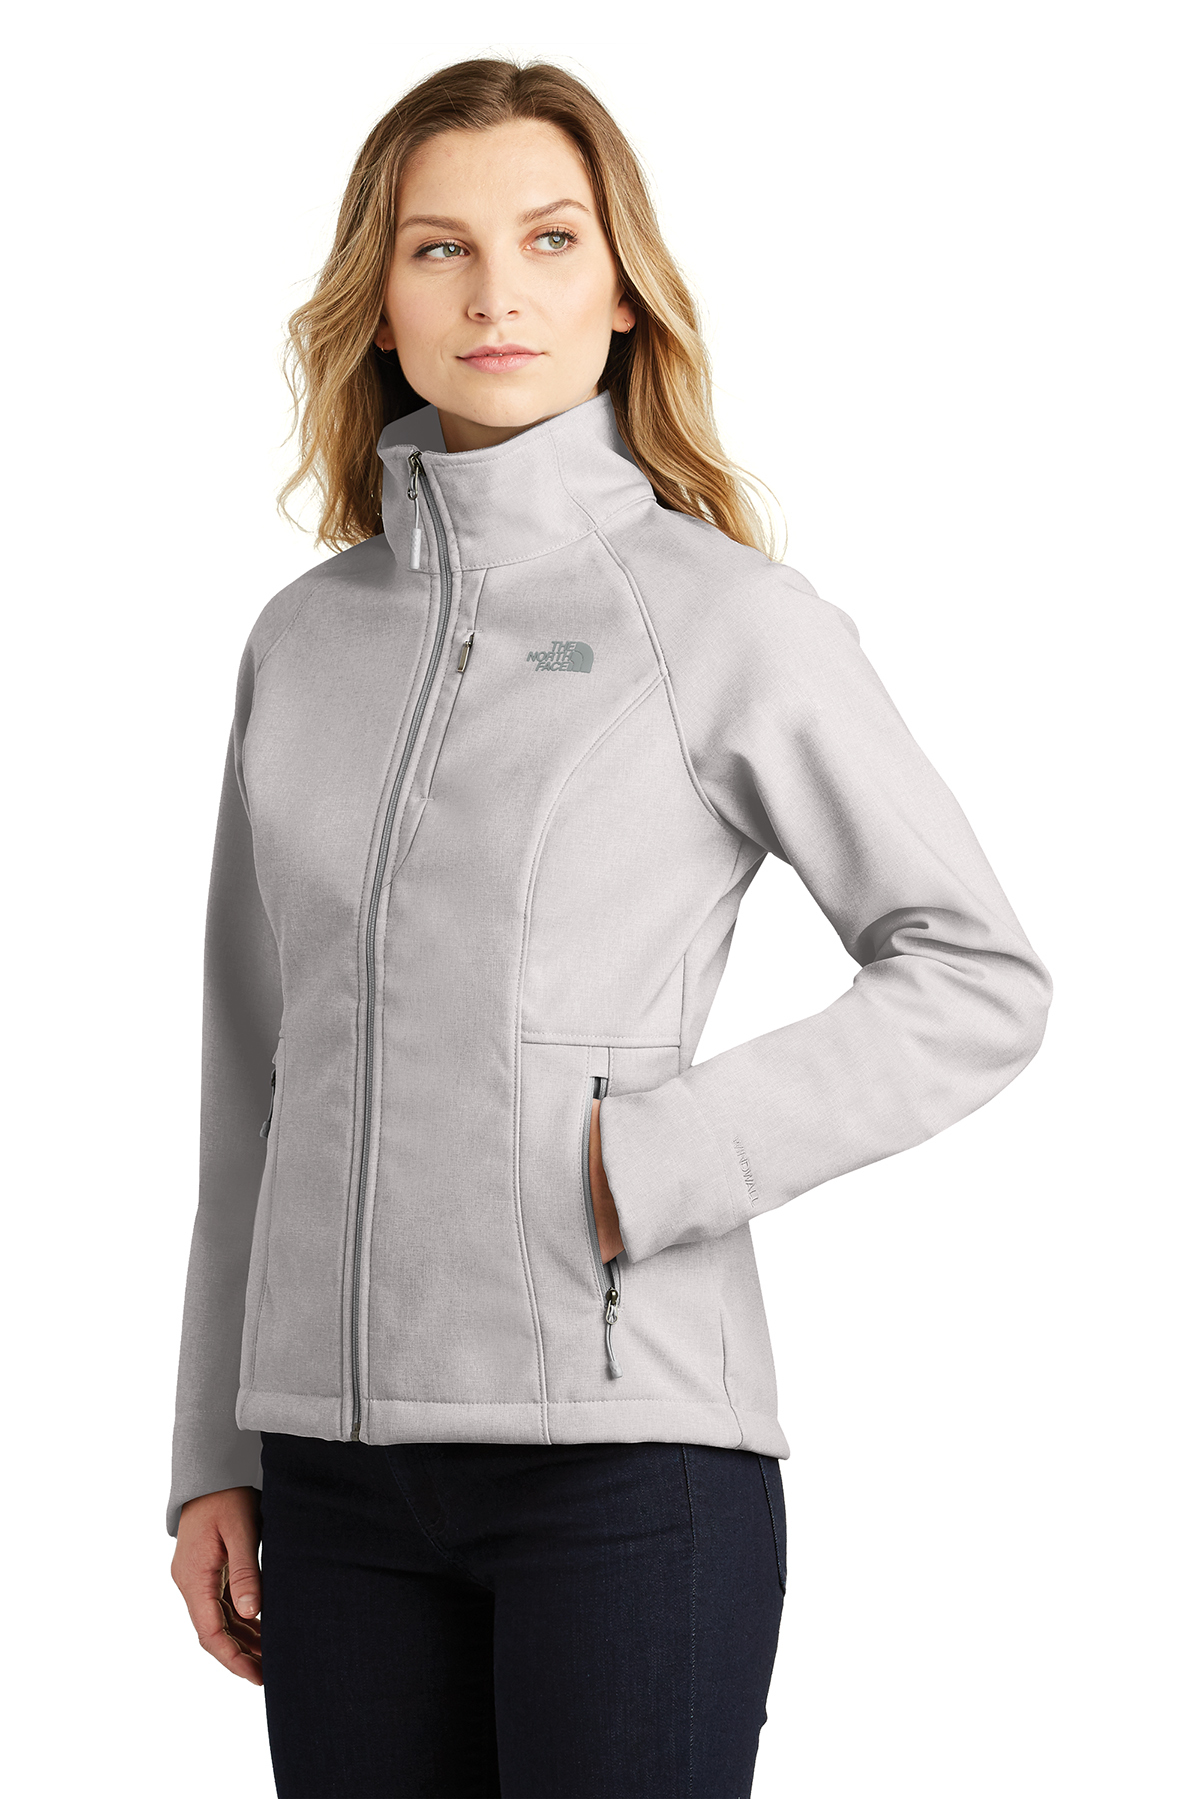 north face apex barrier soft shell jacket womens